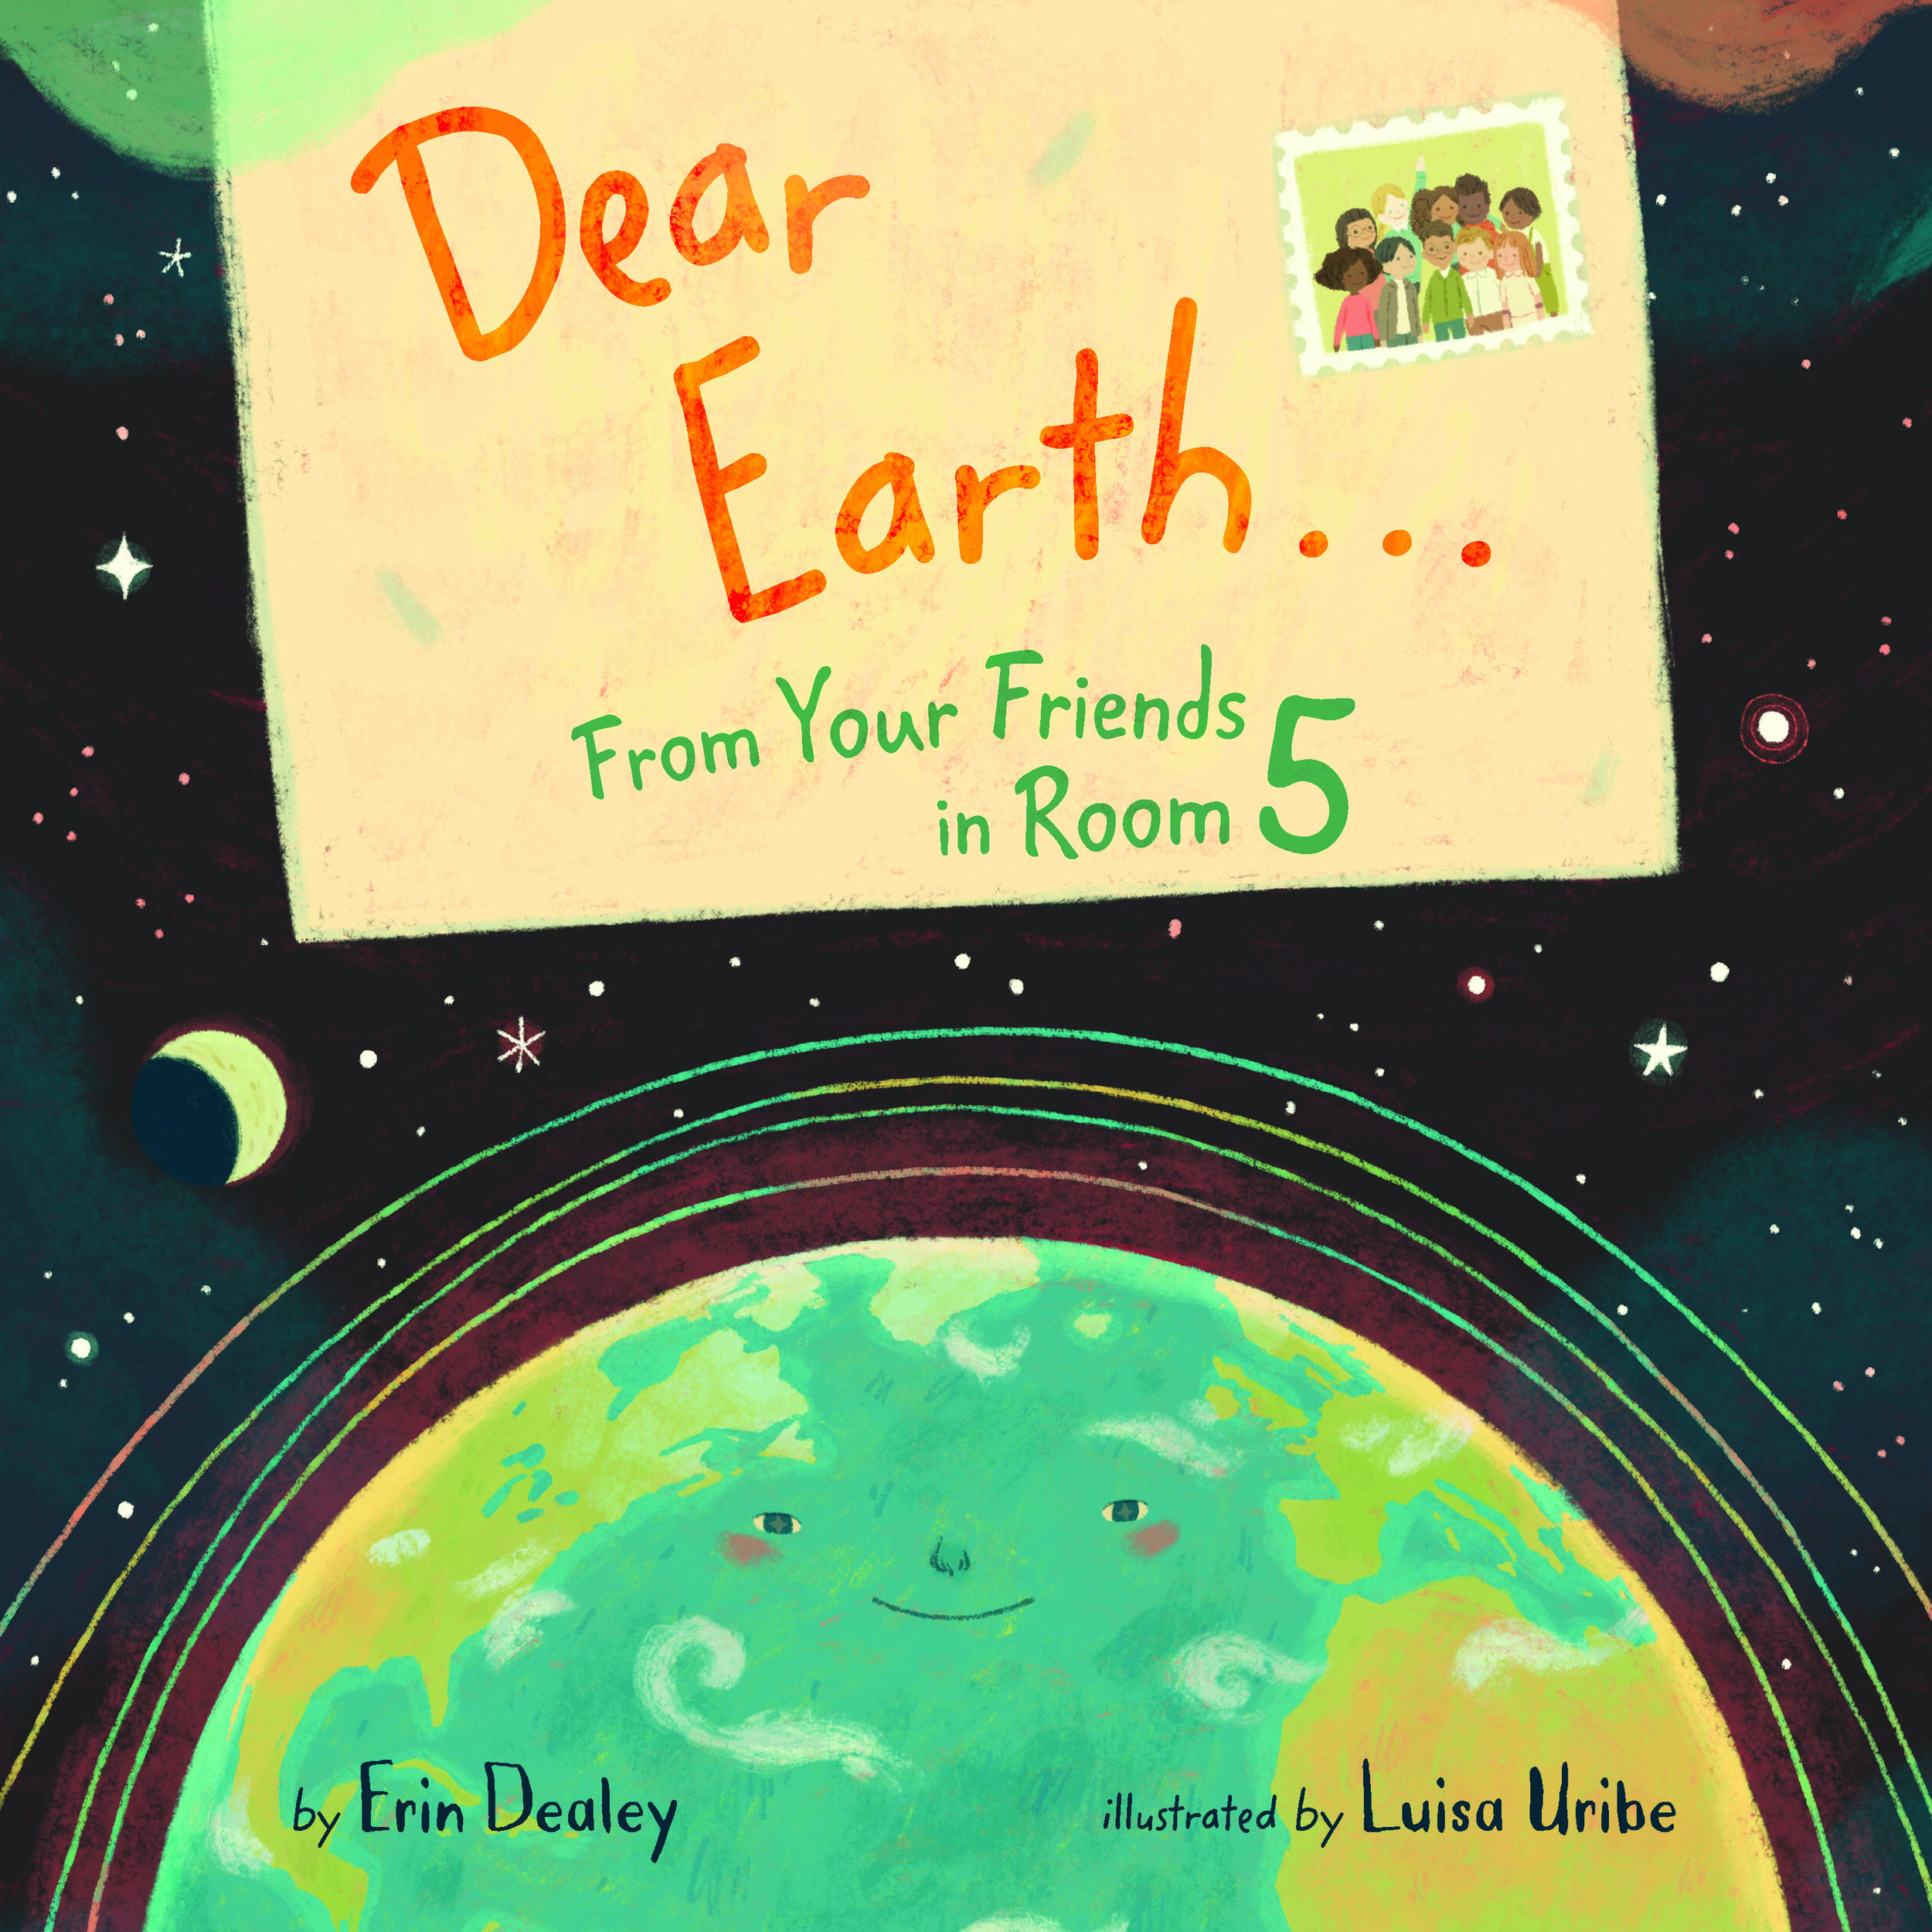 Dear Earth . . . From Your Friends in Room 5